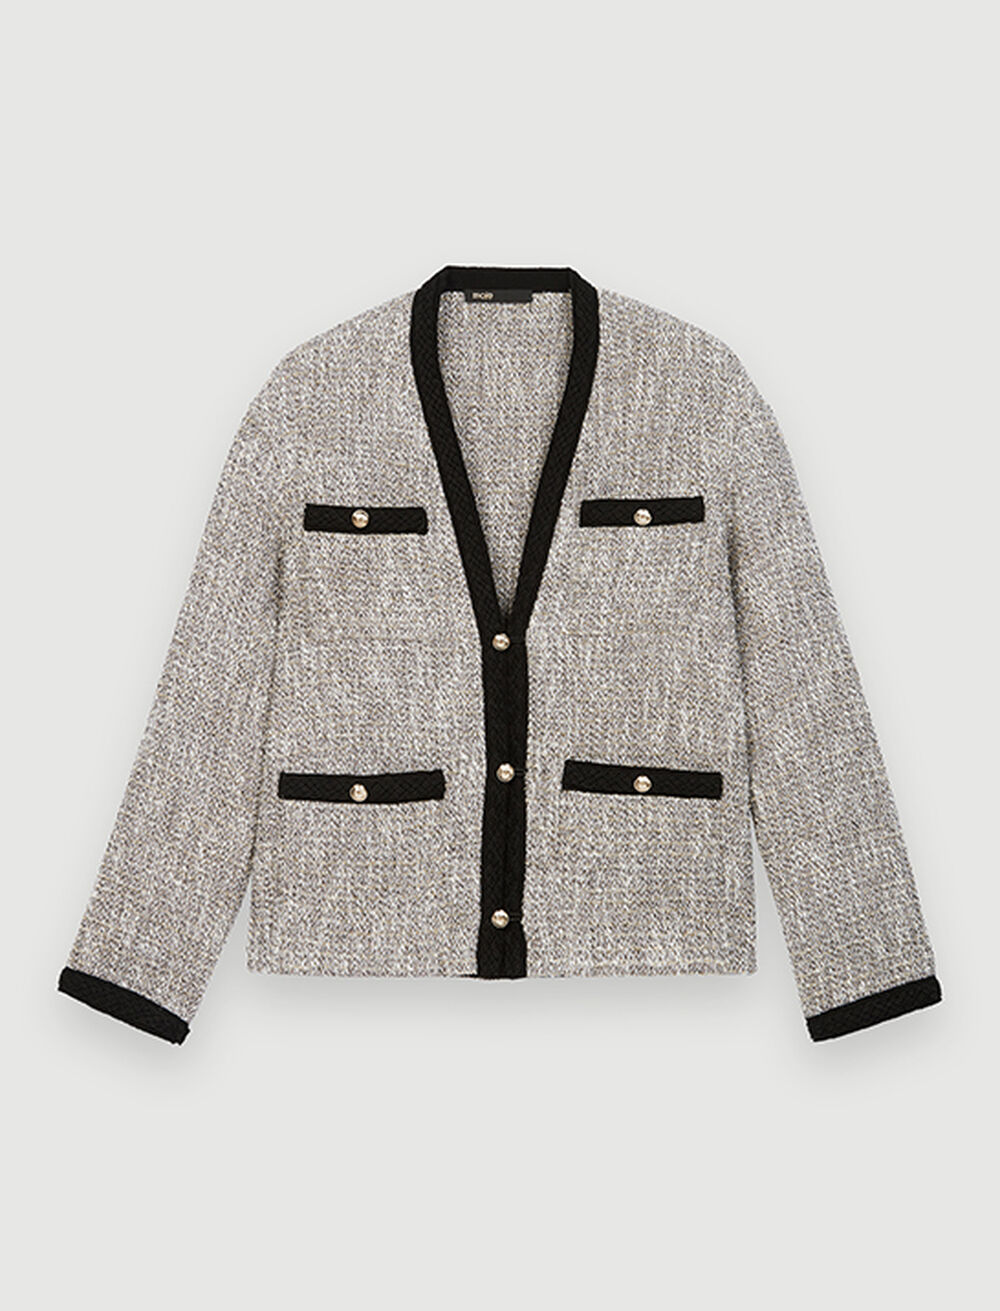 120VINIE Tweed-style jacket with contrast details - Coats & Jackets ...